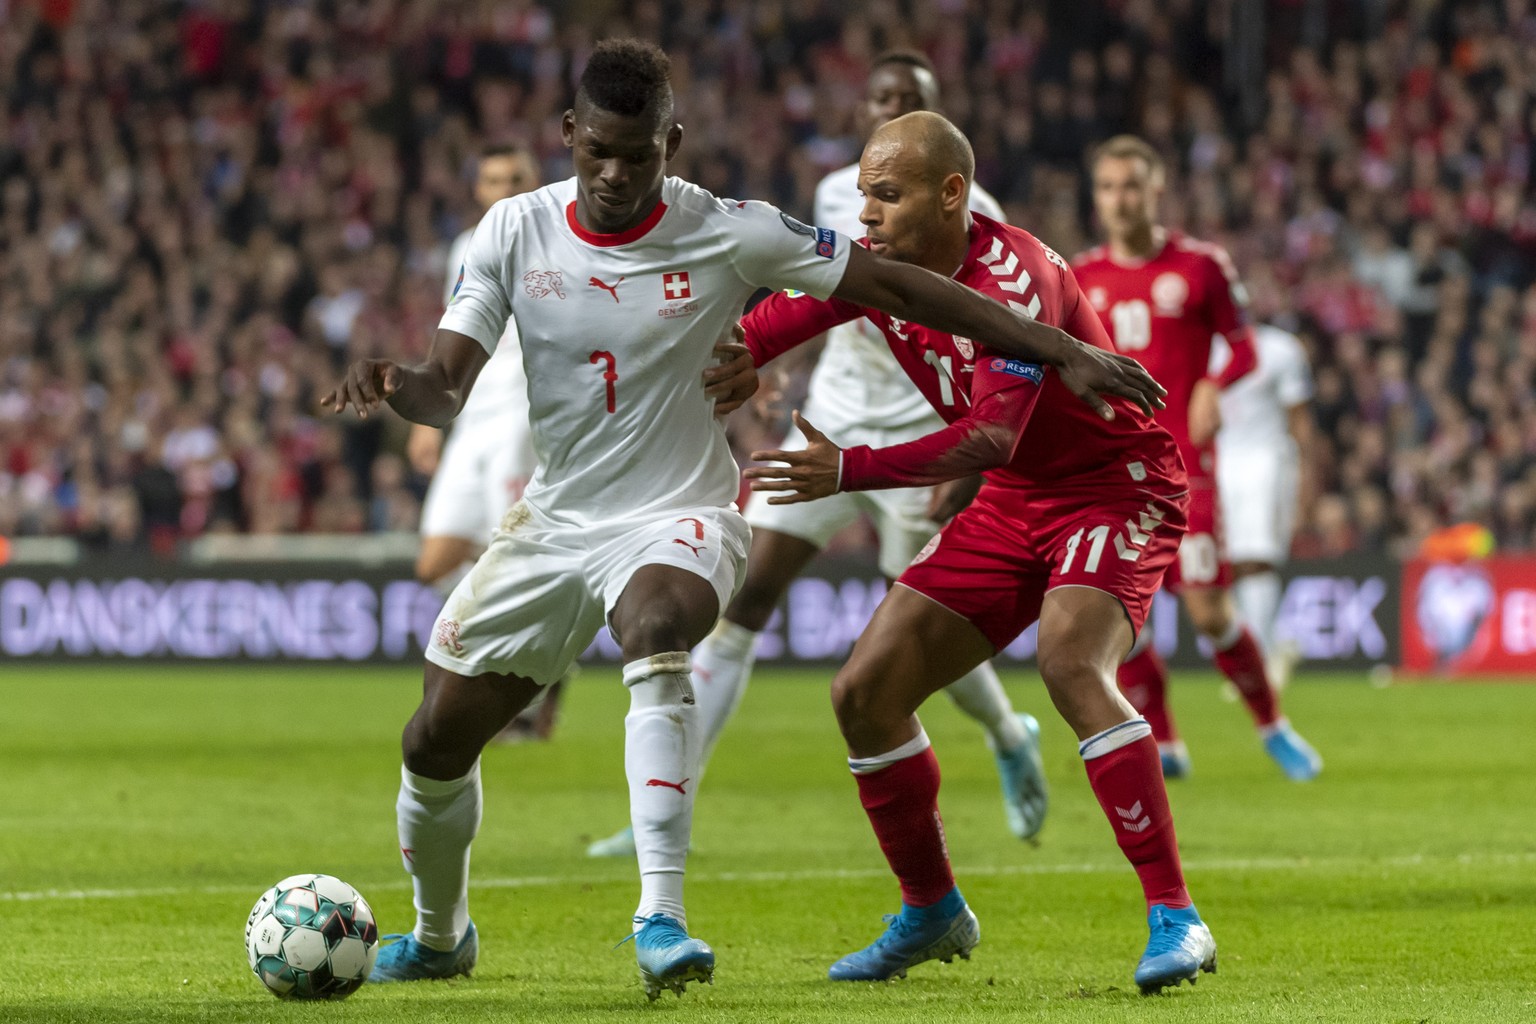 Switzerland&#039;s Breel Embolo, left, fights for the ball against Denmark&#039;s Martin Braithwaite, right, during the UEFA Euro 2020 qualifying Group D soccer match between Denmark and Switzerland a ...